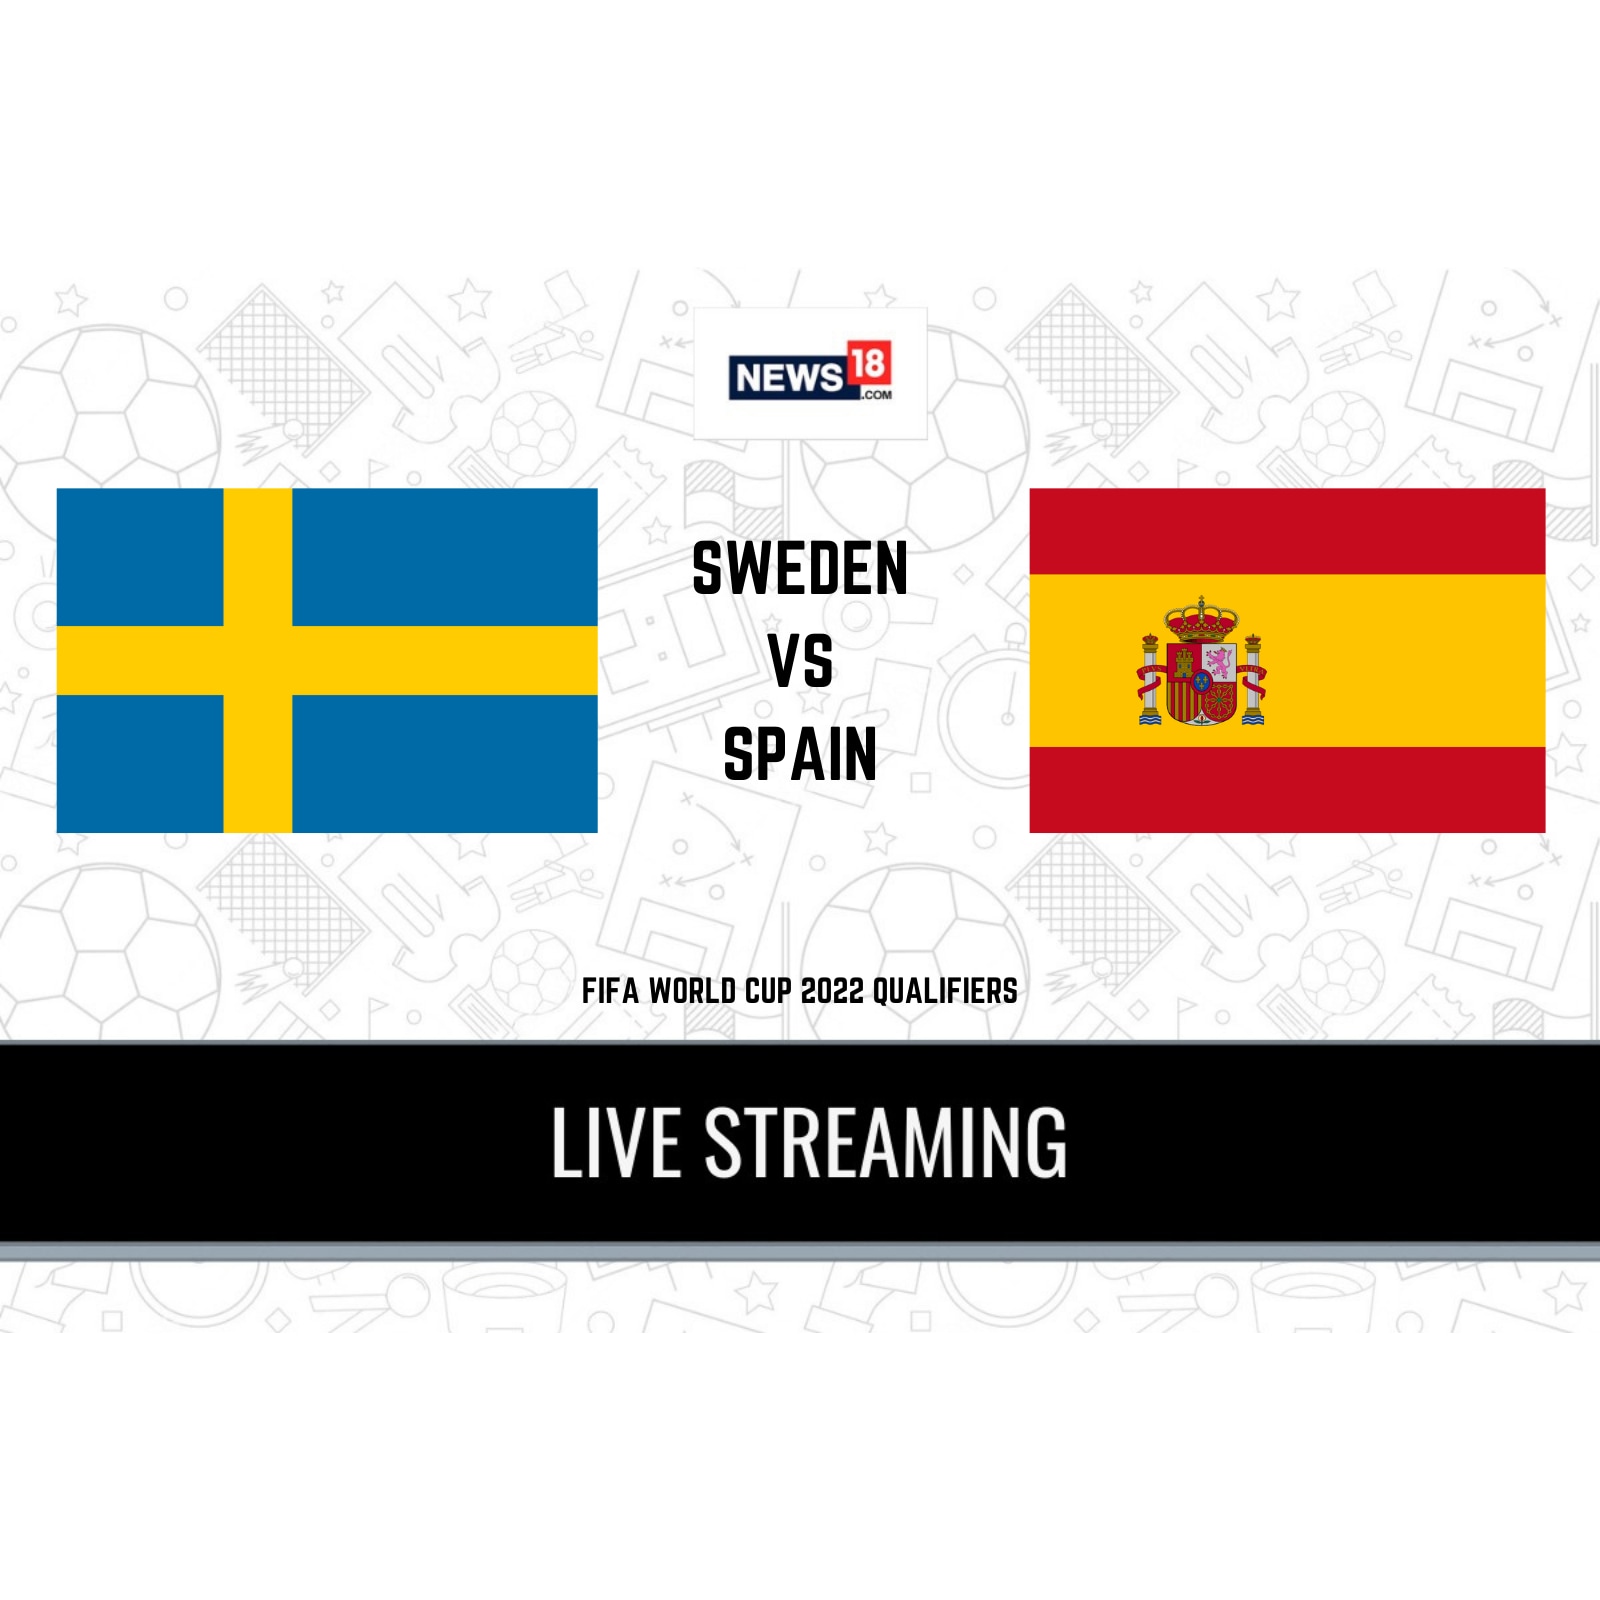 2022 FIFA World Cup Qualifiers Sweden vs Spain LIVE Streaming When and Where to Watch Online, TV Telecast, Team News